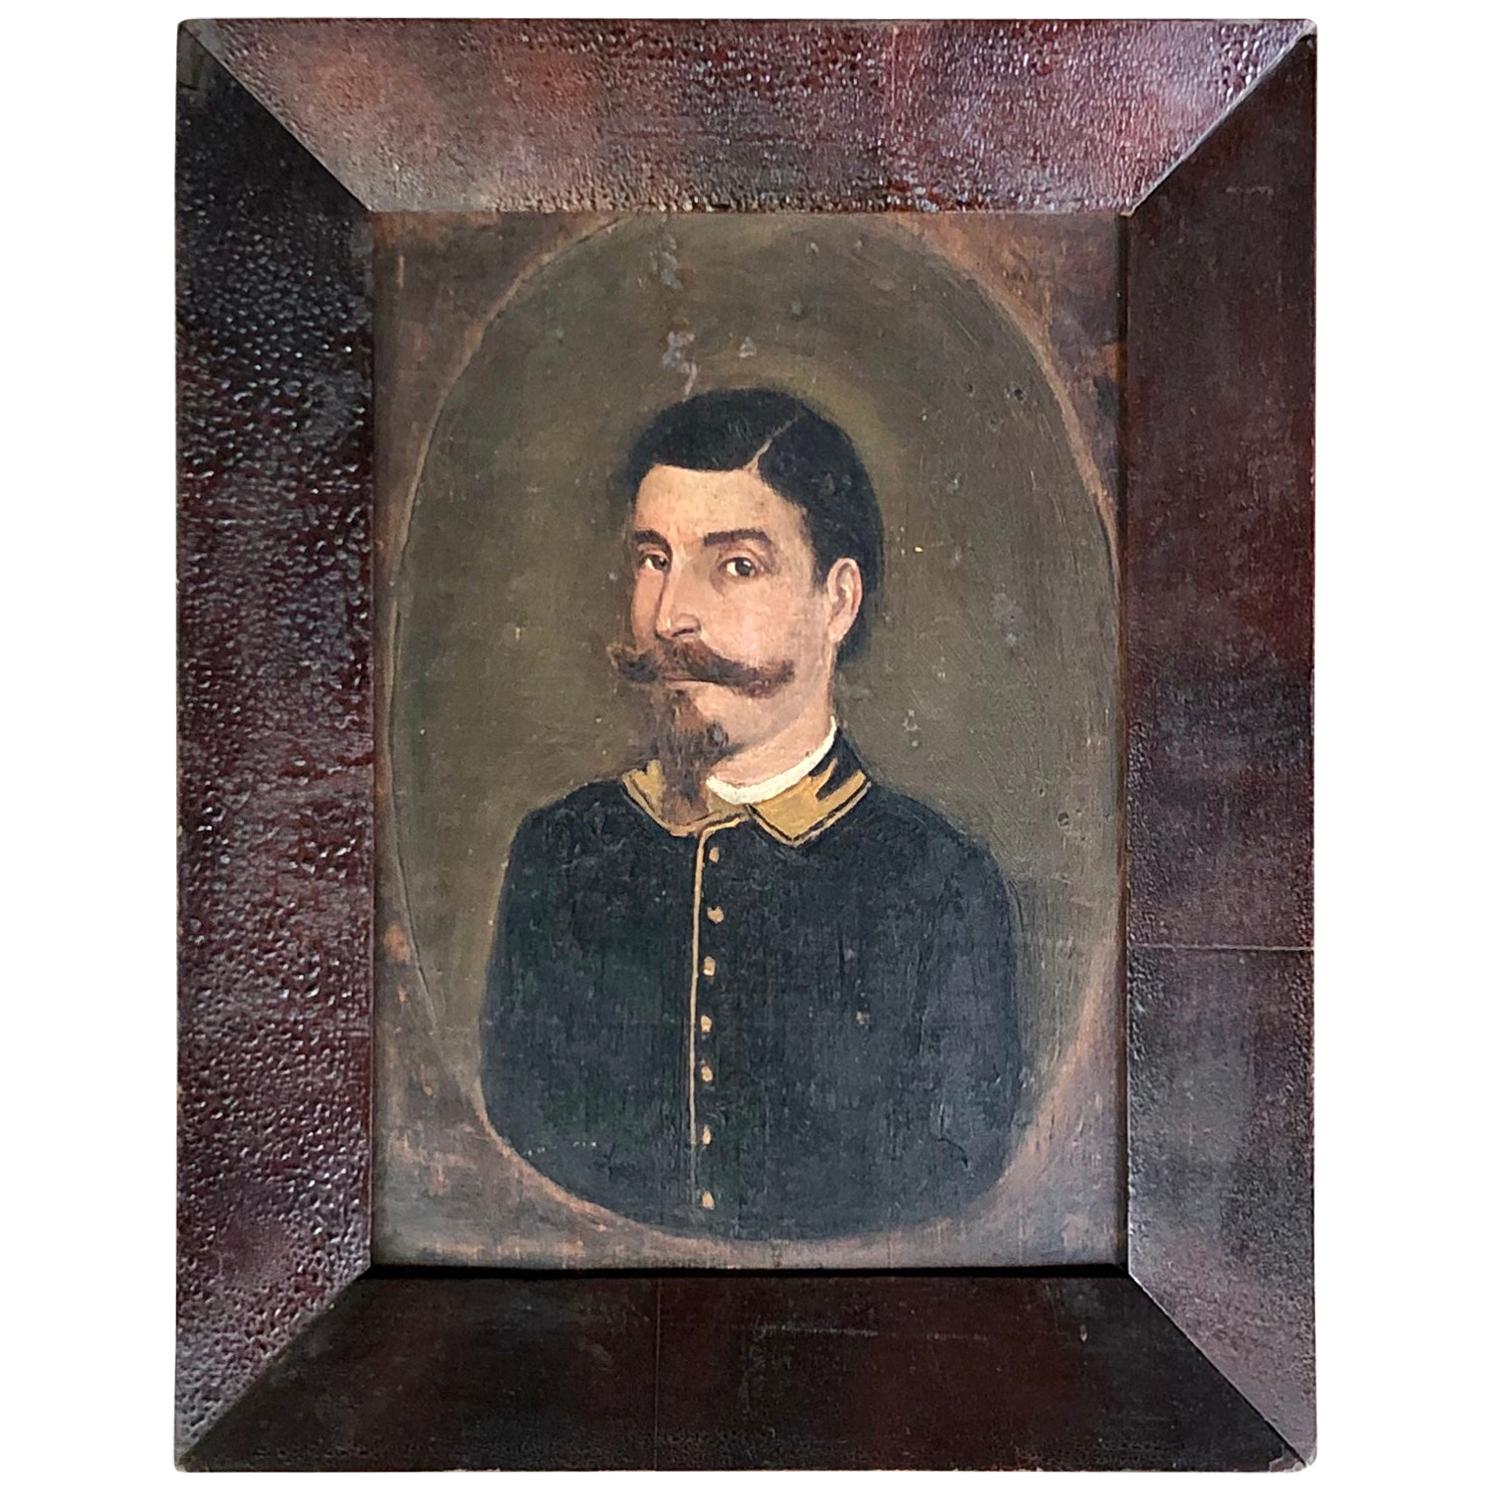 19th Century Painting of a Man in a Military Uniform